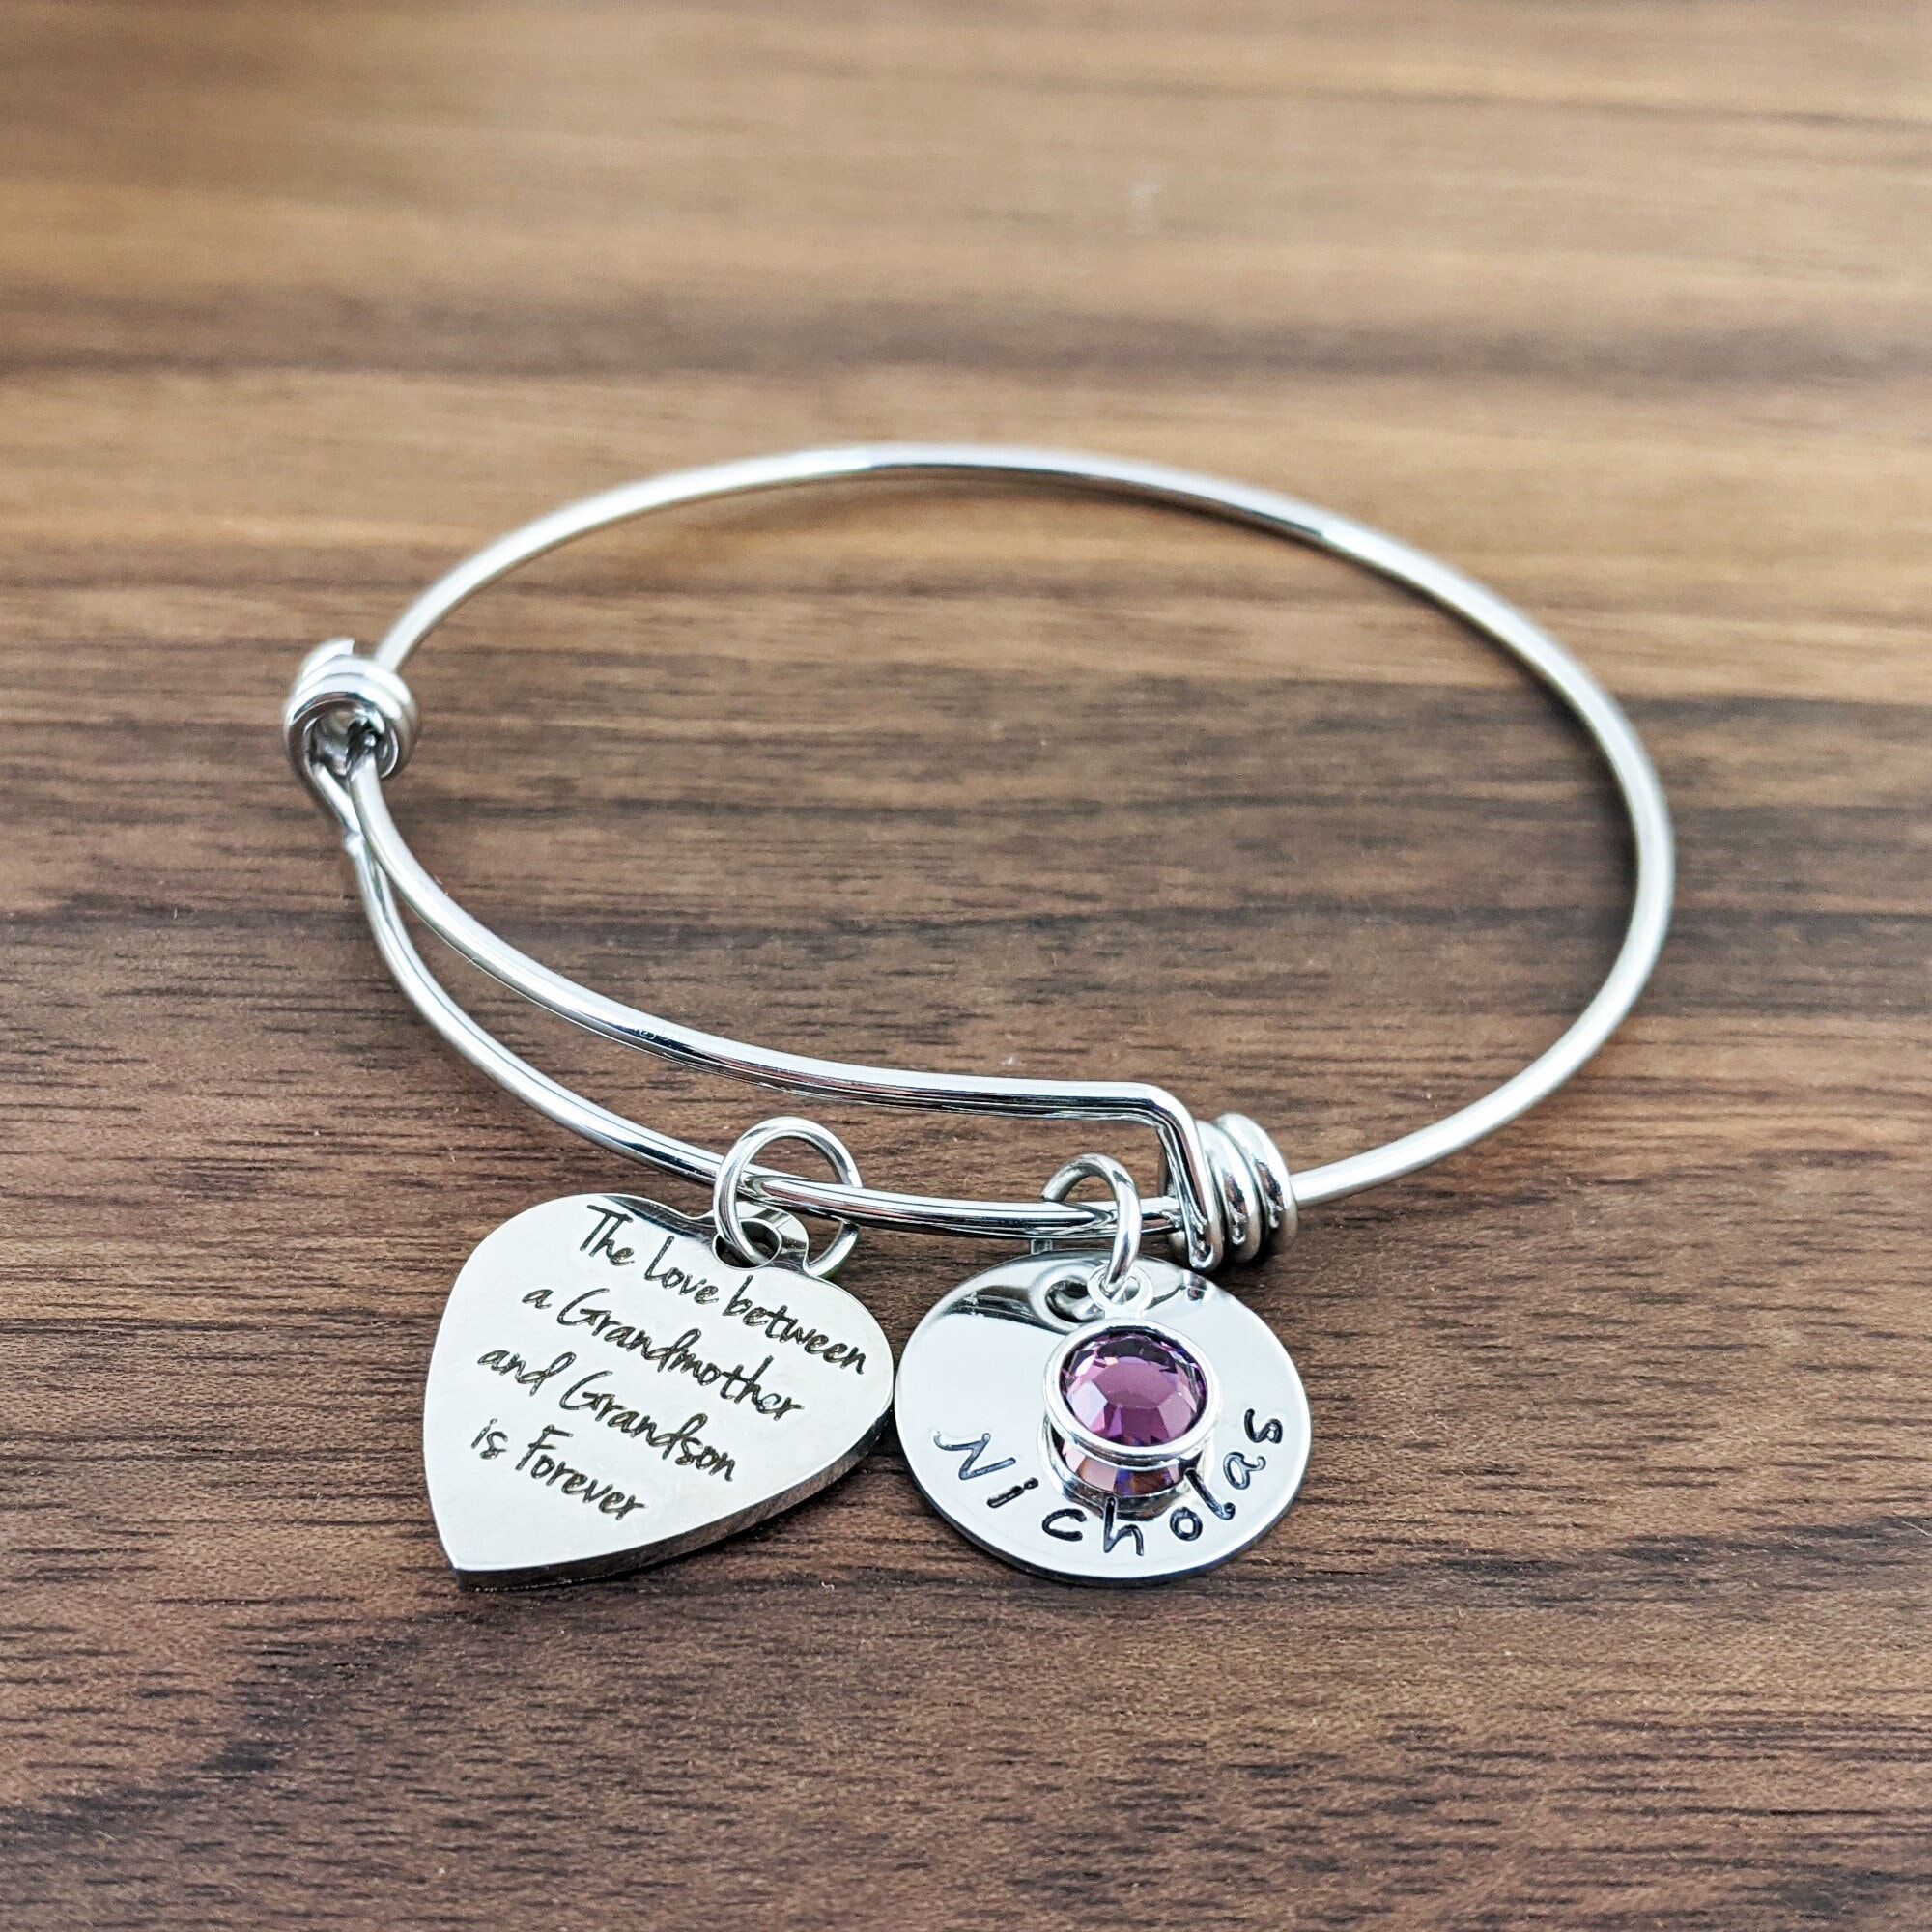 Grandma to Be Stainless Steel Expandable Charm Bracelet Handmade in USA Wire Bangle Gift Trendy Stacking